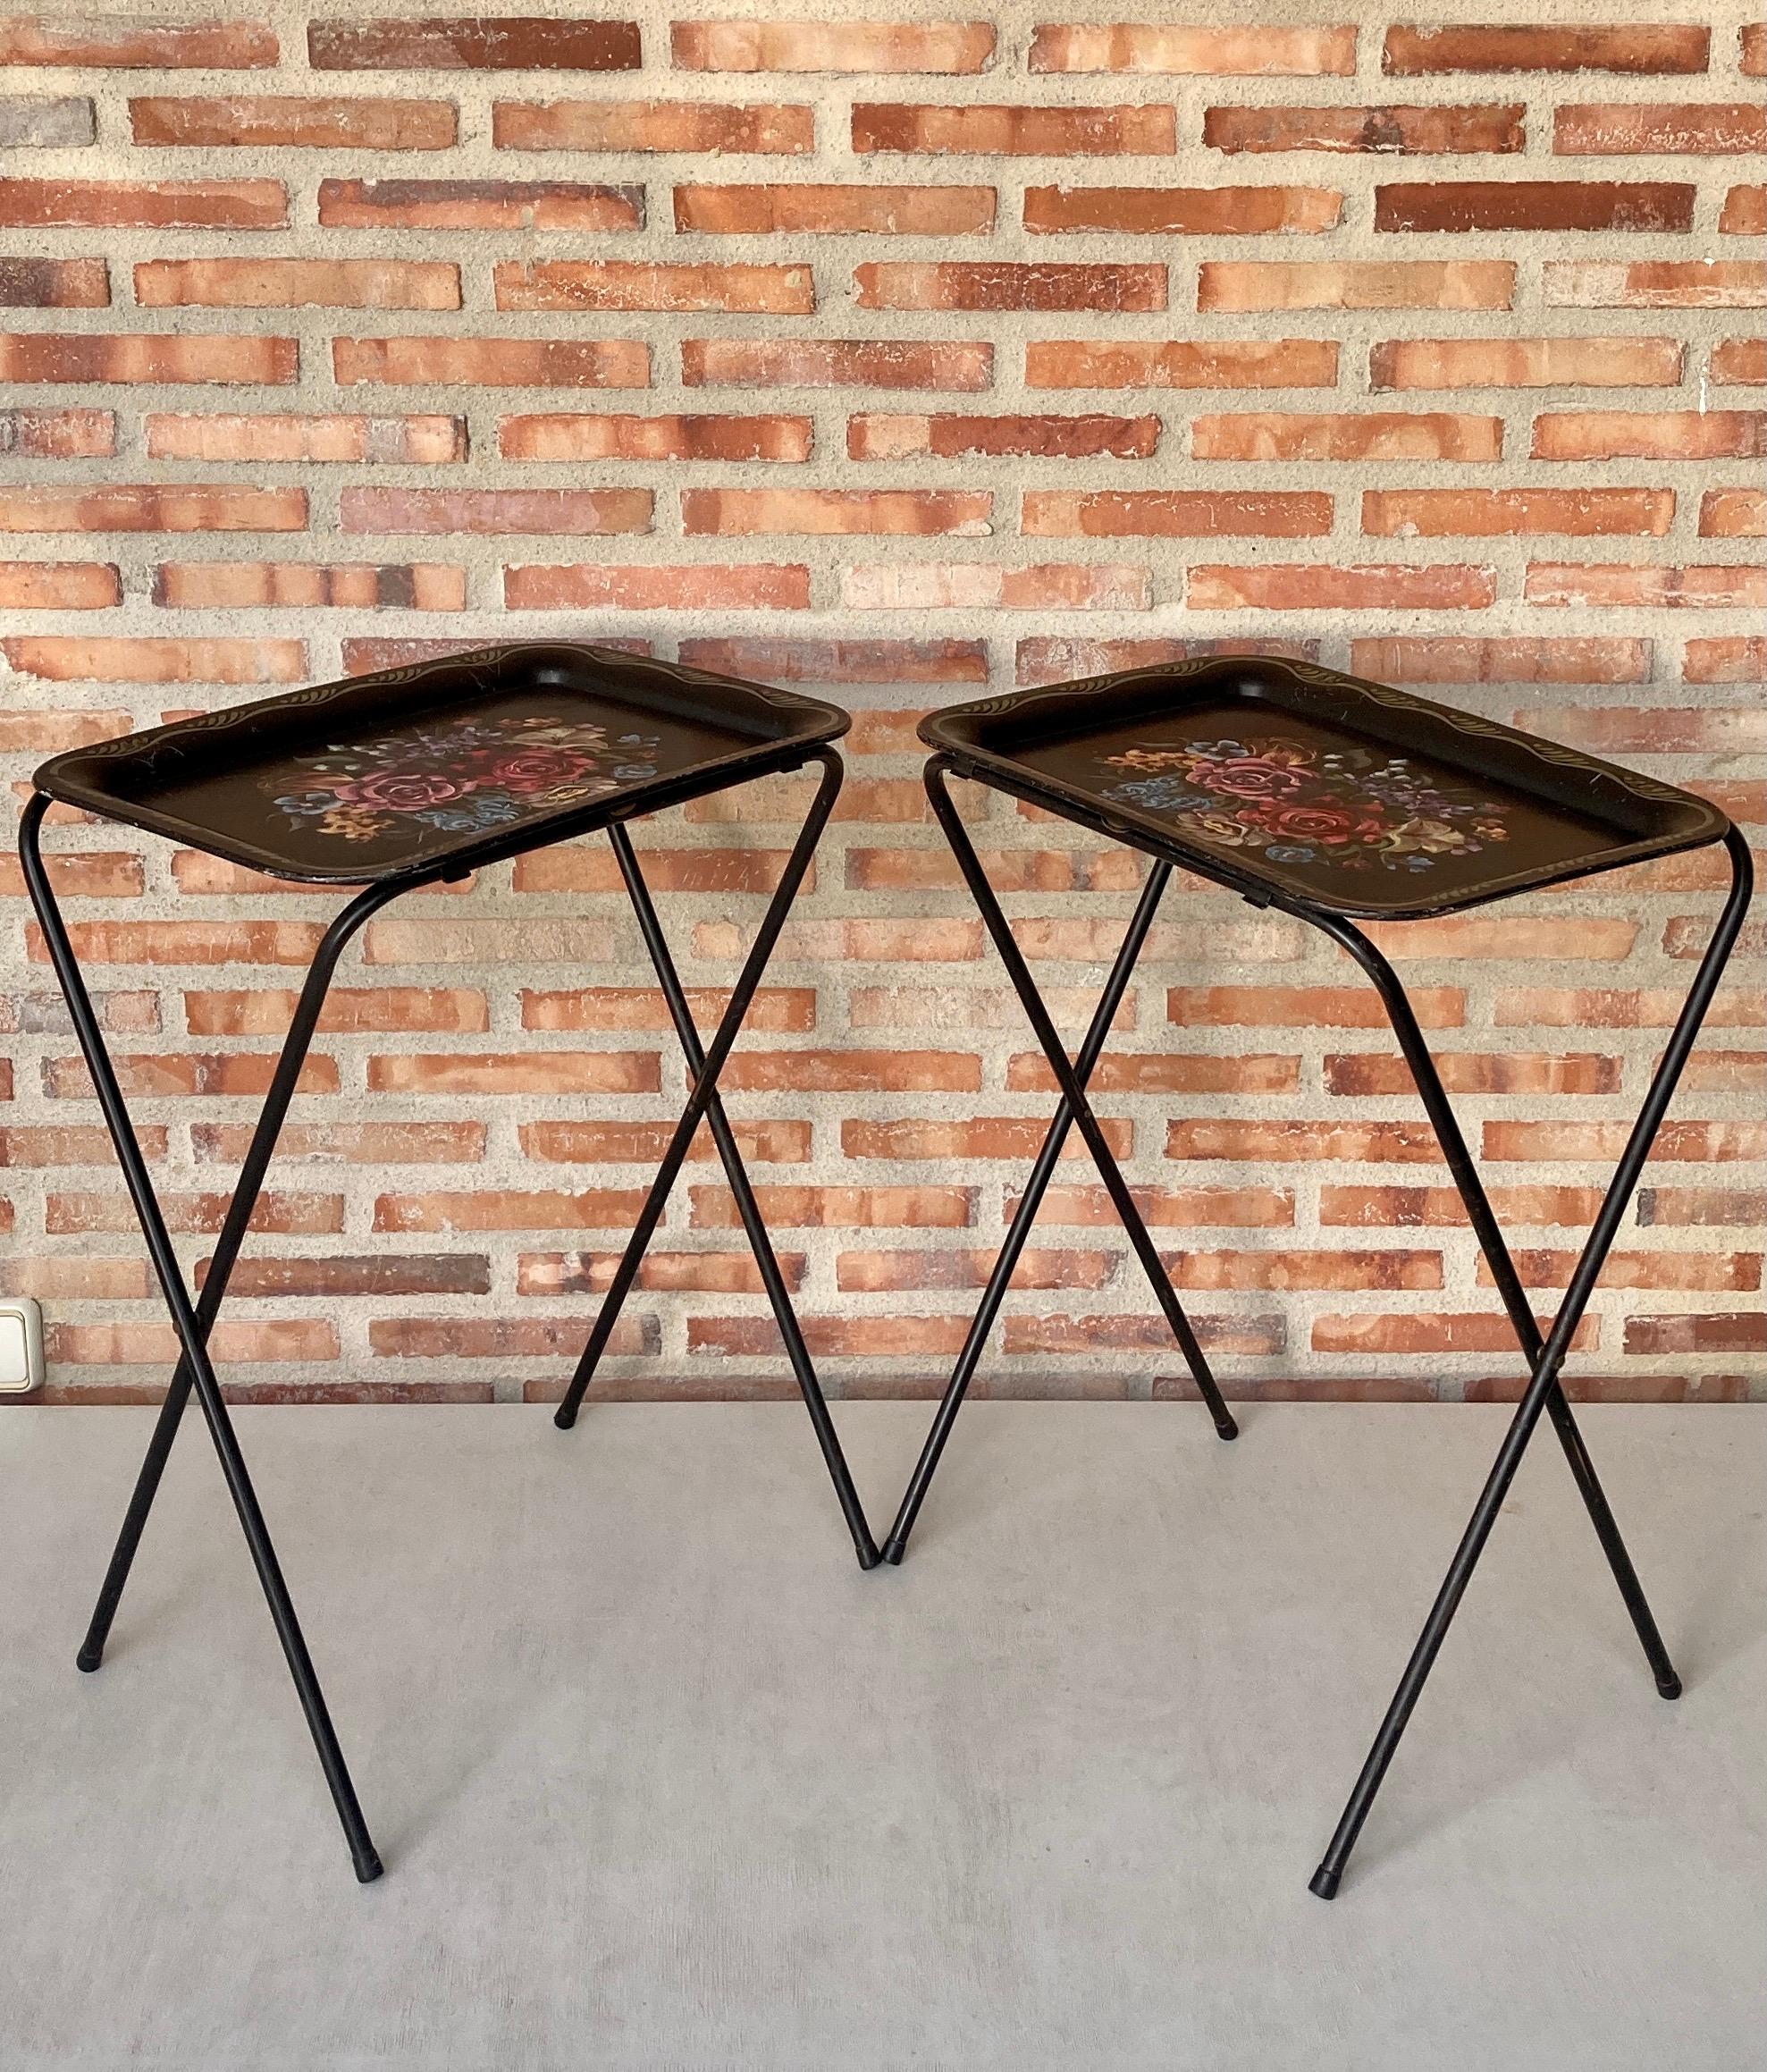 Two elegant antique metal butler trays in black, on an original stand dating to around 1960. Two good-size folding trays on an X-frame stand, all in an original finish. A quality and highly functional piece that would work equally well in a hall,